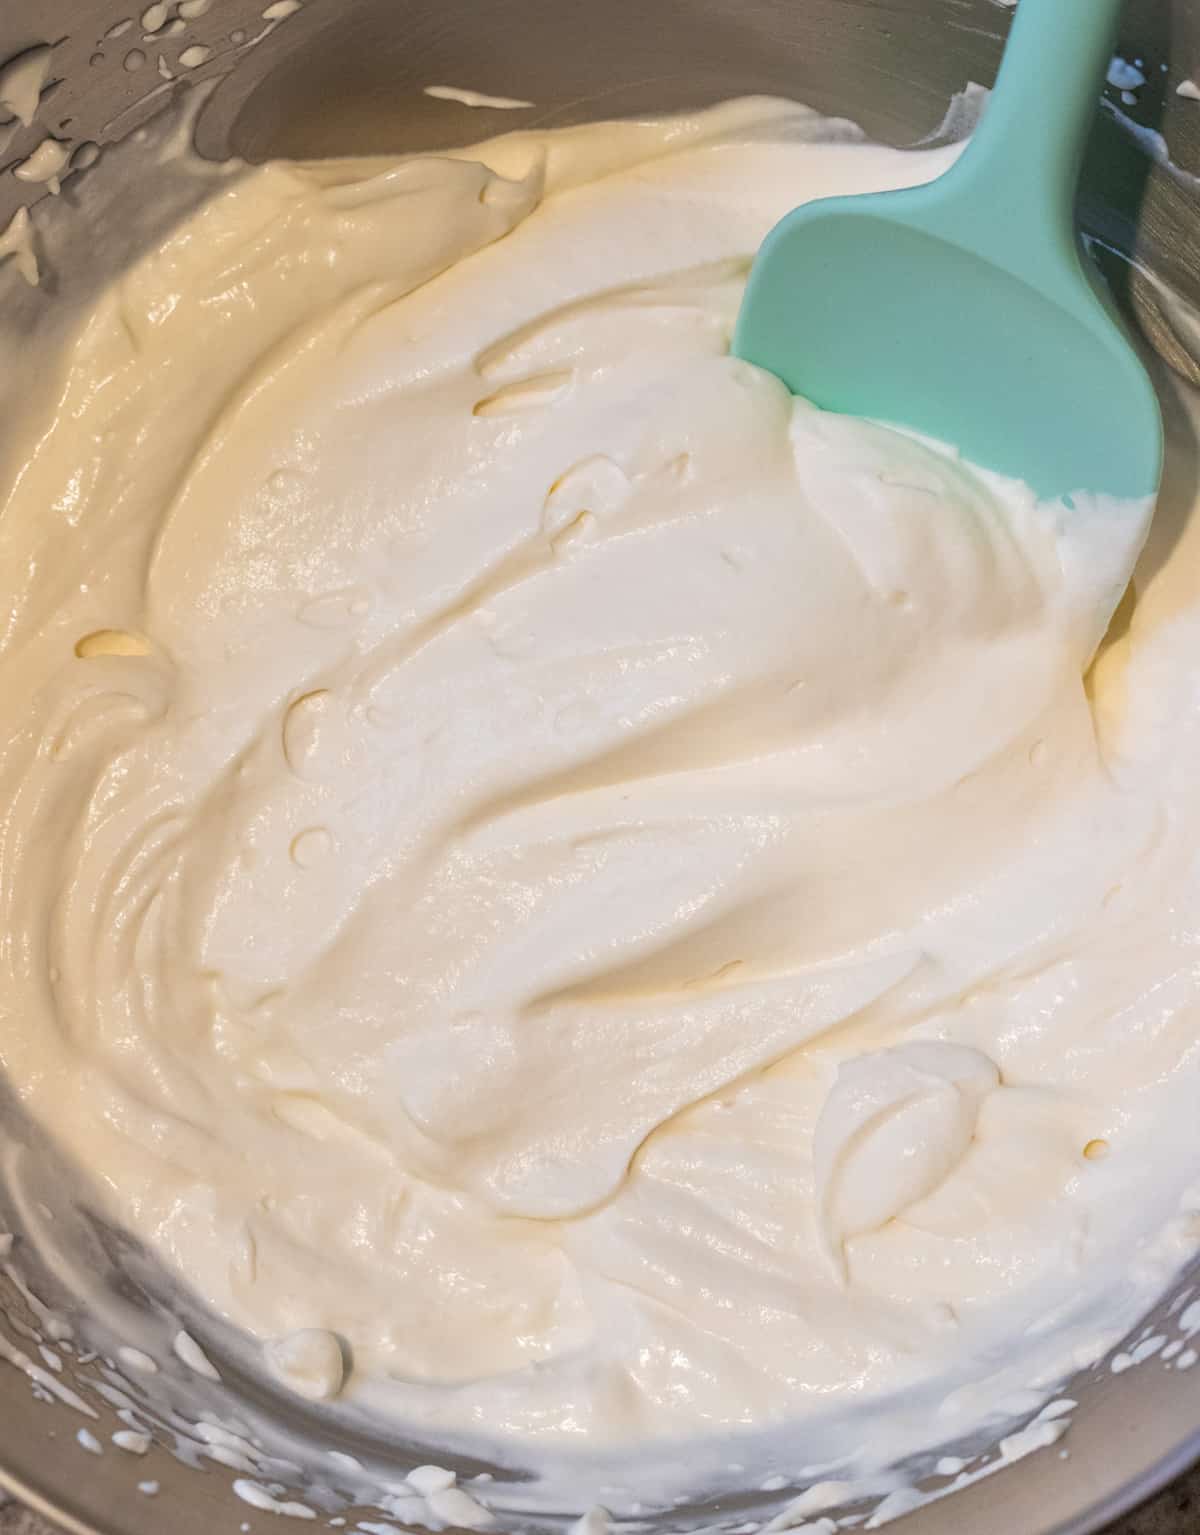 Creamy whipped topping in a bowl with a blue spatula.